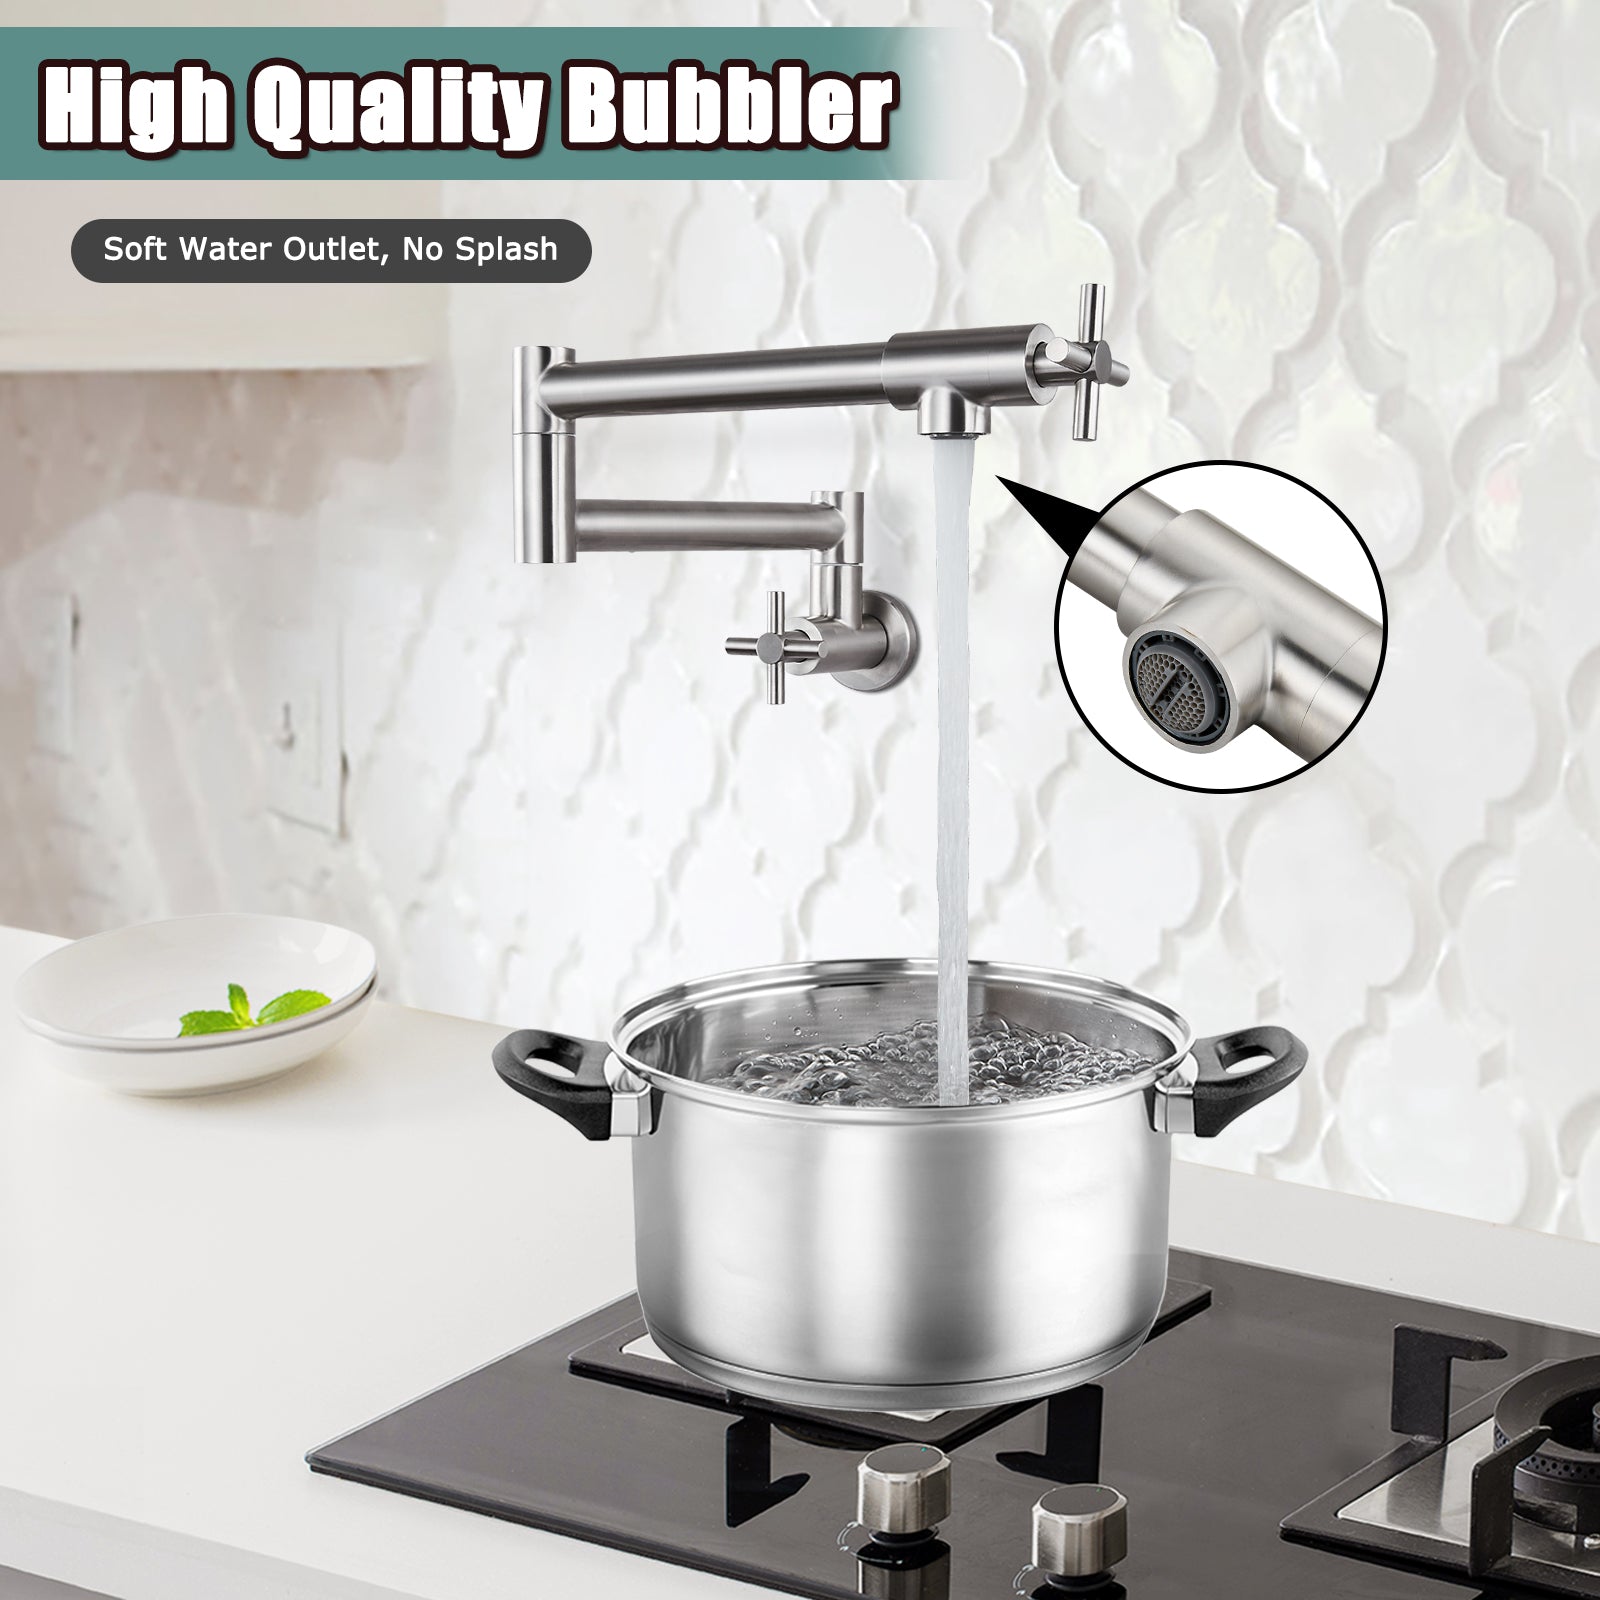 Heyalan Pot Filler Kitchen Faucet Stainless Steel SUS304 Two Cross Handle 19 Inch Single Hole Spout Wall Mounted Stretchable Swing Arm Commercial Kitchen Sink Faucet to Control Water